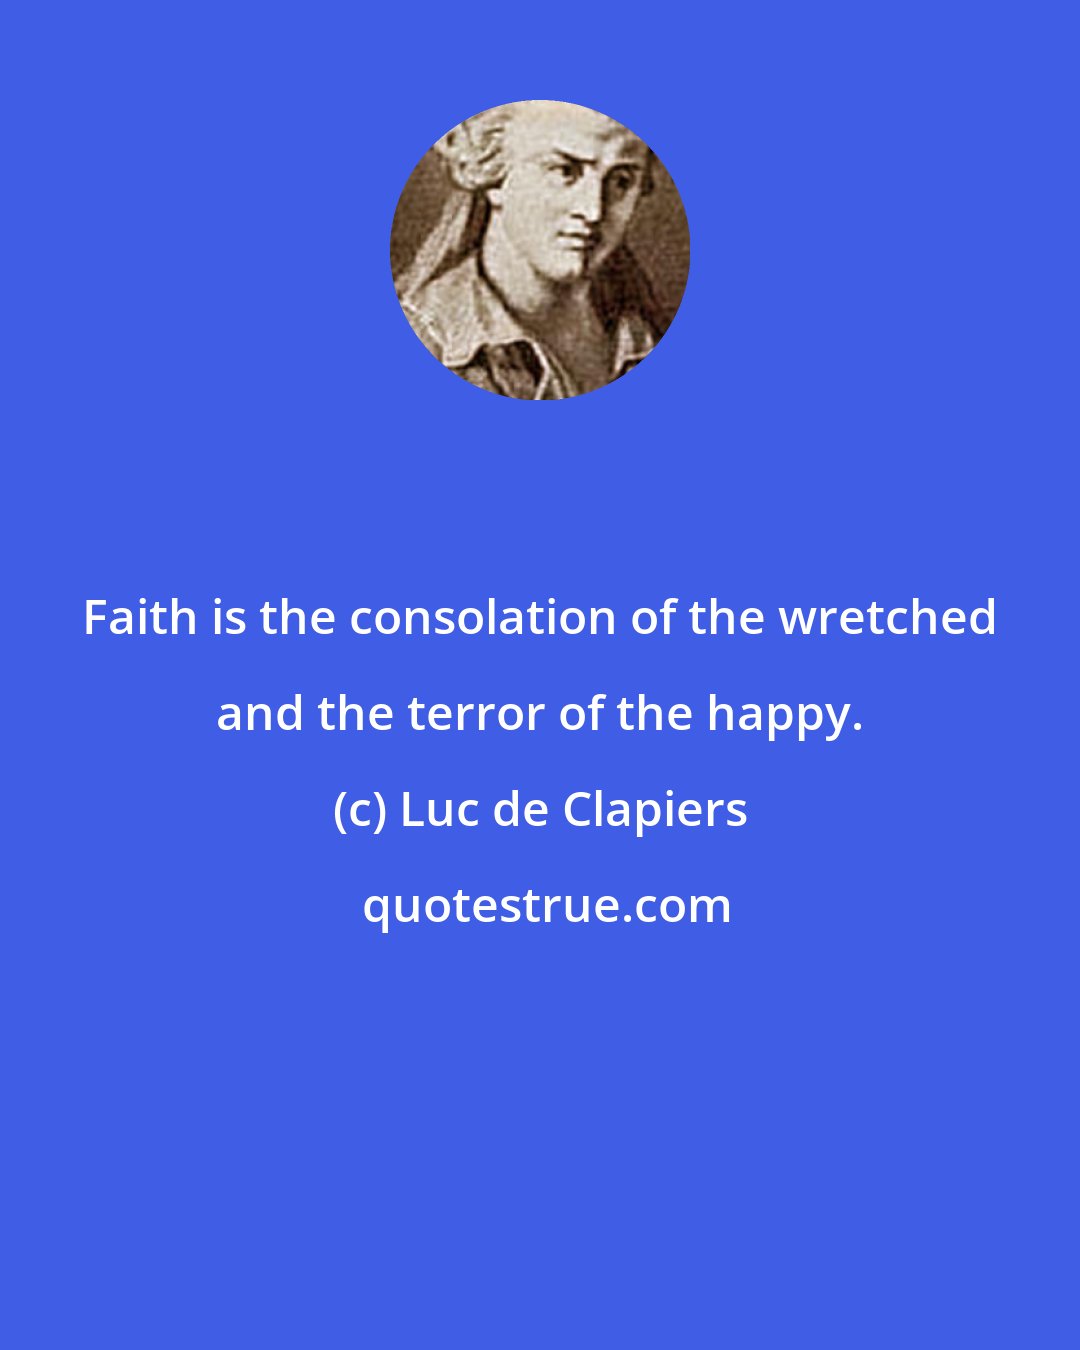 Luc de Clapiers: Faith is the consolation of the wretched and the terror of the happy.